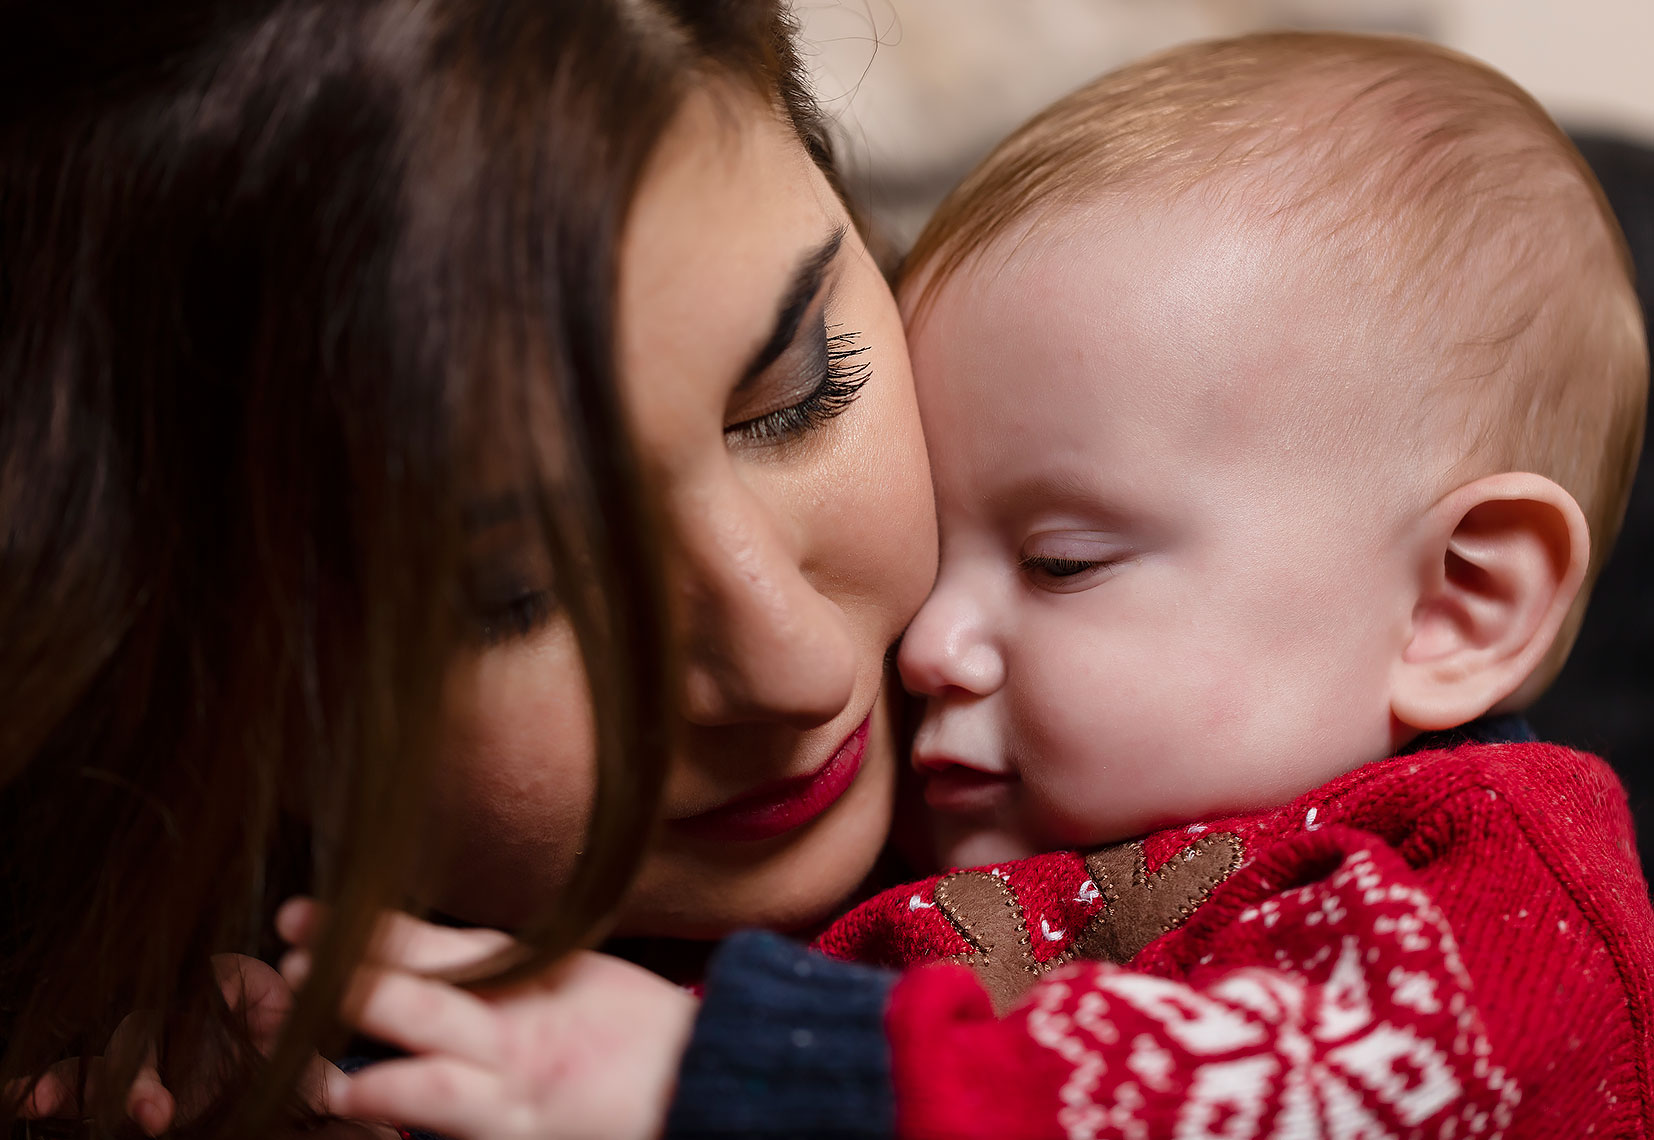 Young mother with brown hair gently holding baby wearing red sweater